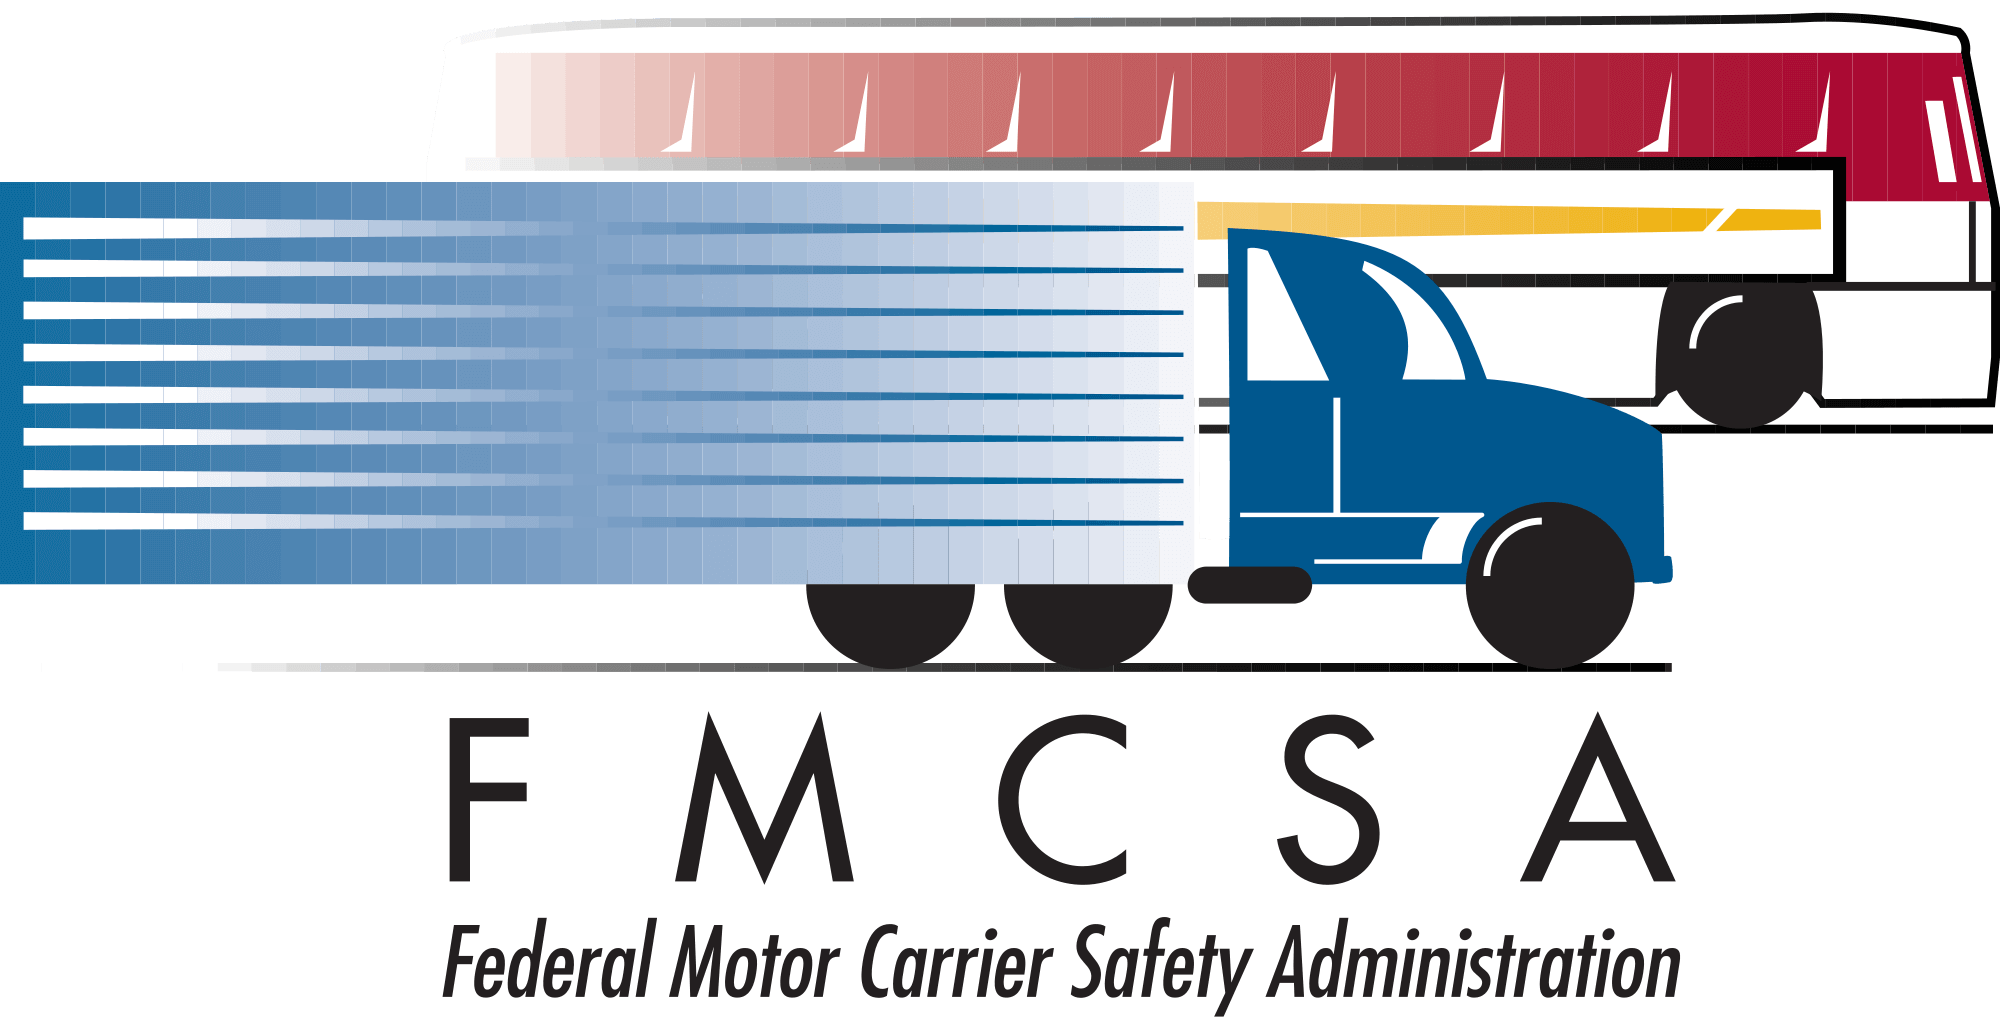 U C Browser Chuby Sex Video - FMCSA Issues New Minimum Training Requirements for Entry-Level Commercial  Motor Vehicle Operators - Daly's Truck Driving School